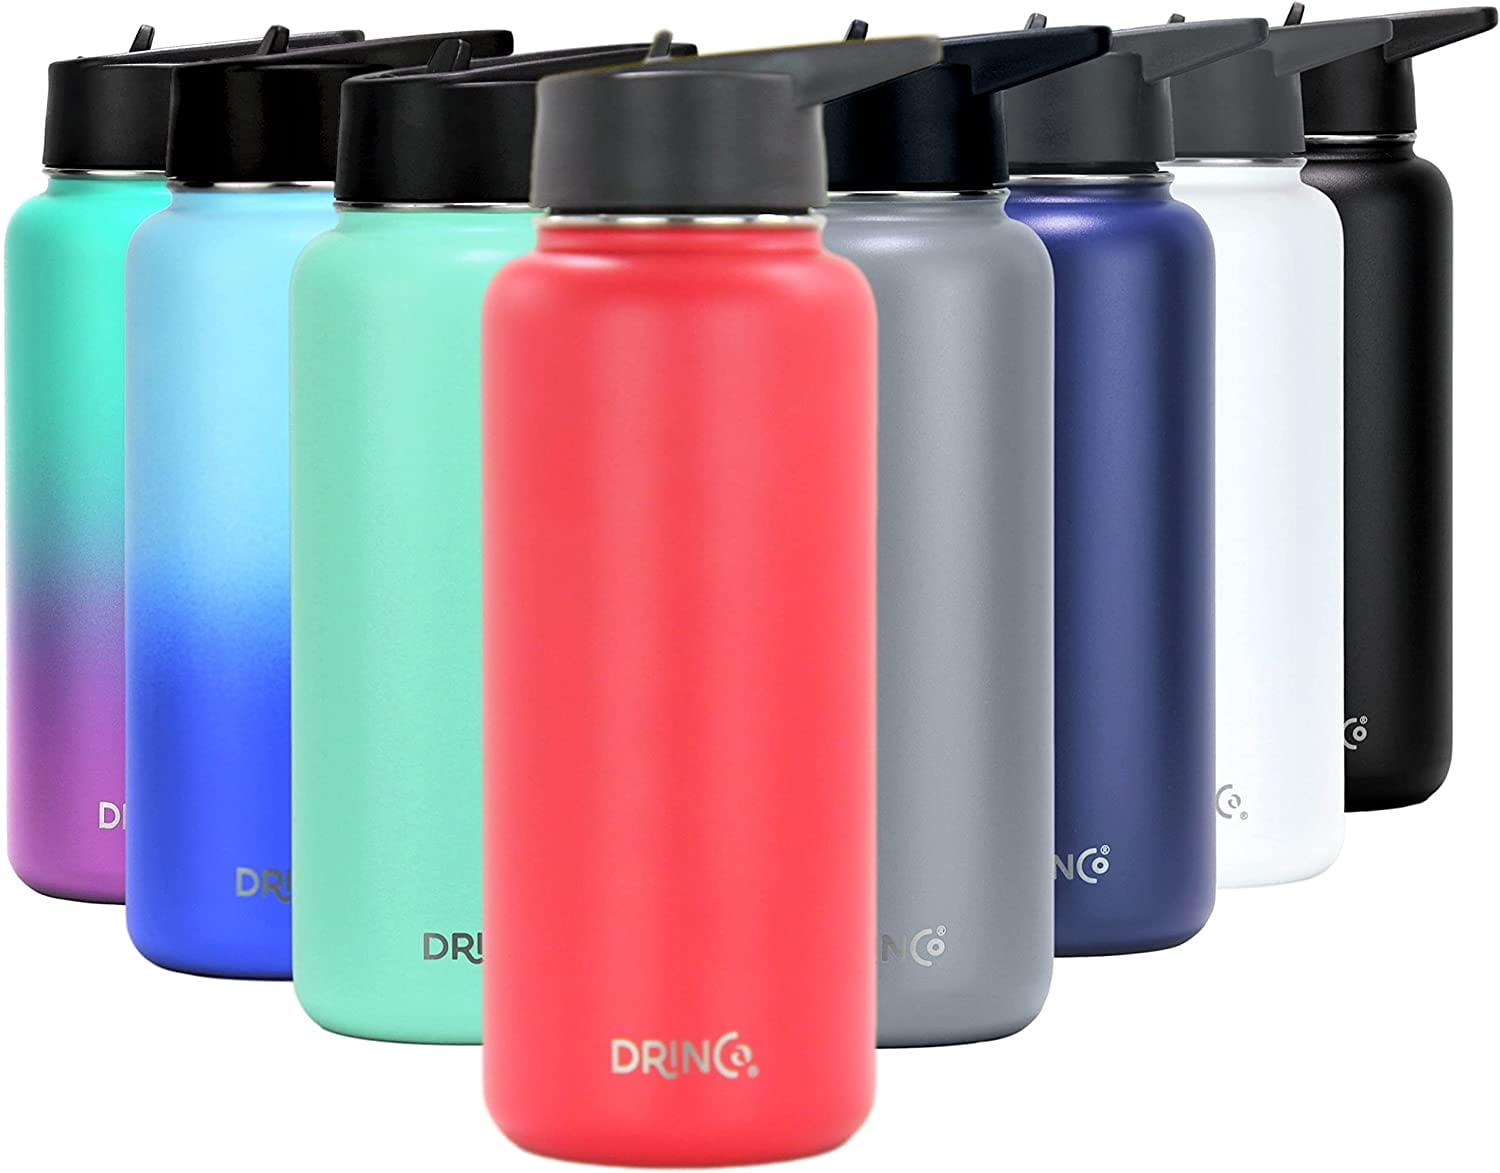  Drinco Stainless Steel Vacuum Insulated Water Bottle, Slim, Double Wall, Wide Mouth, Triple Insulated, Powder Coated Durability, 18/8 Grade